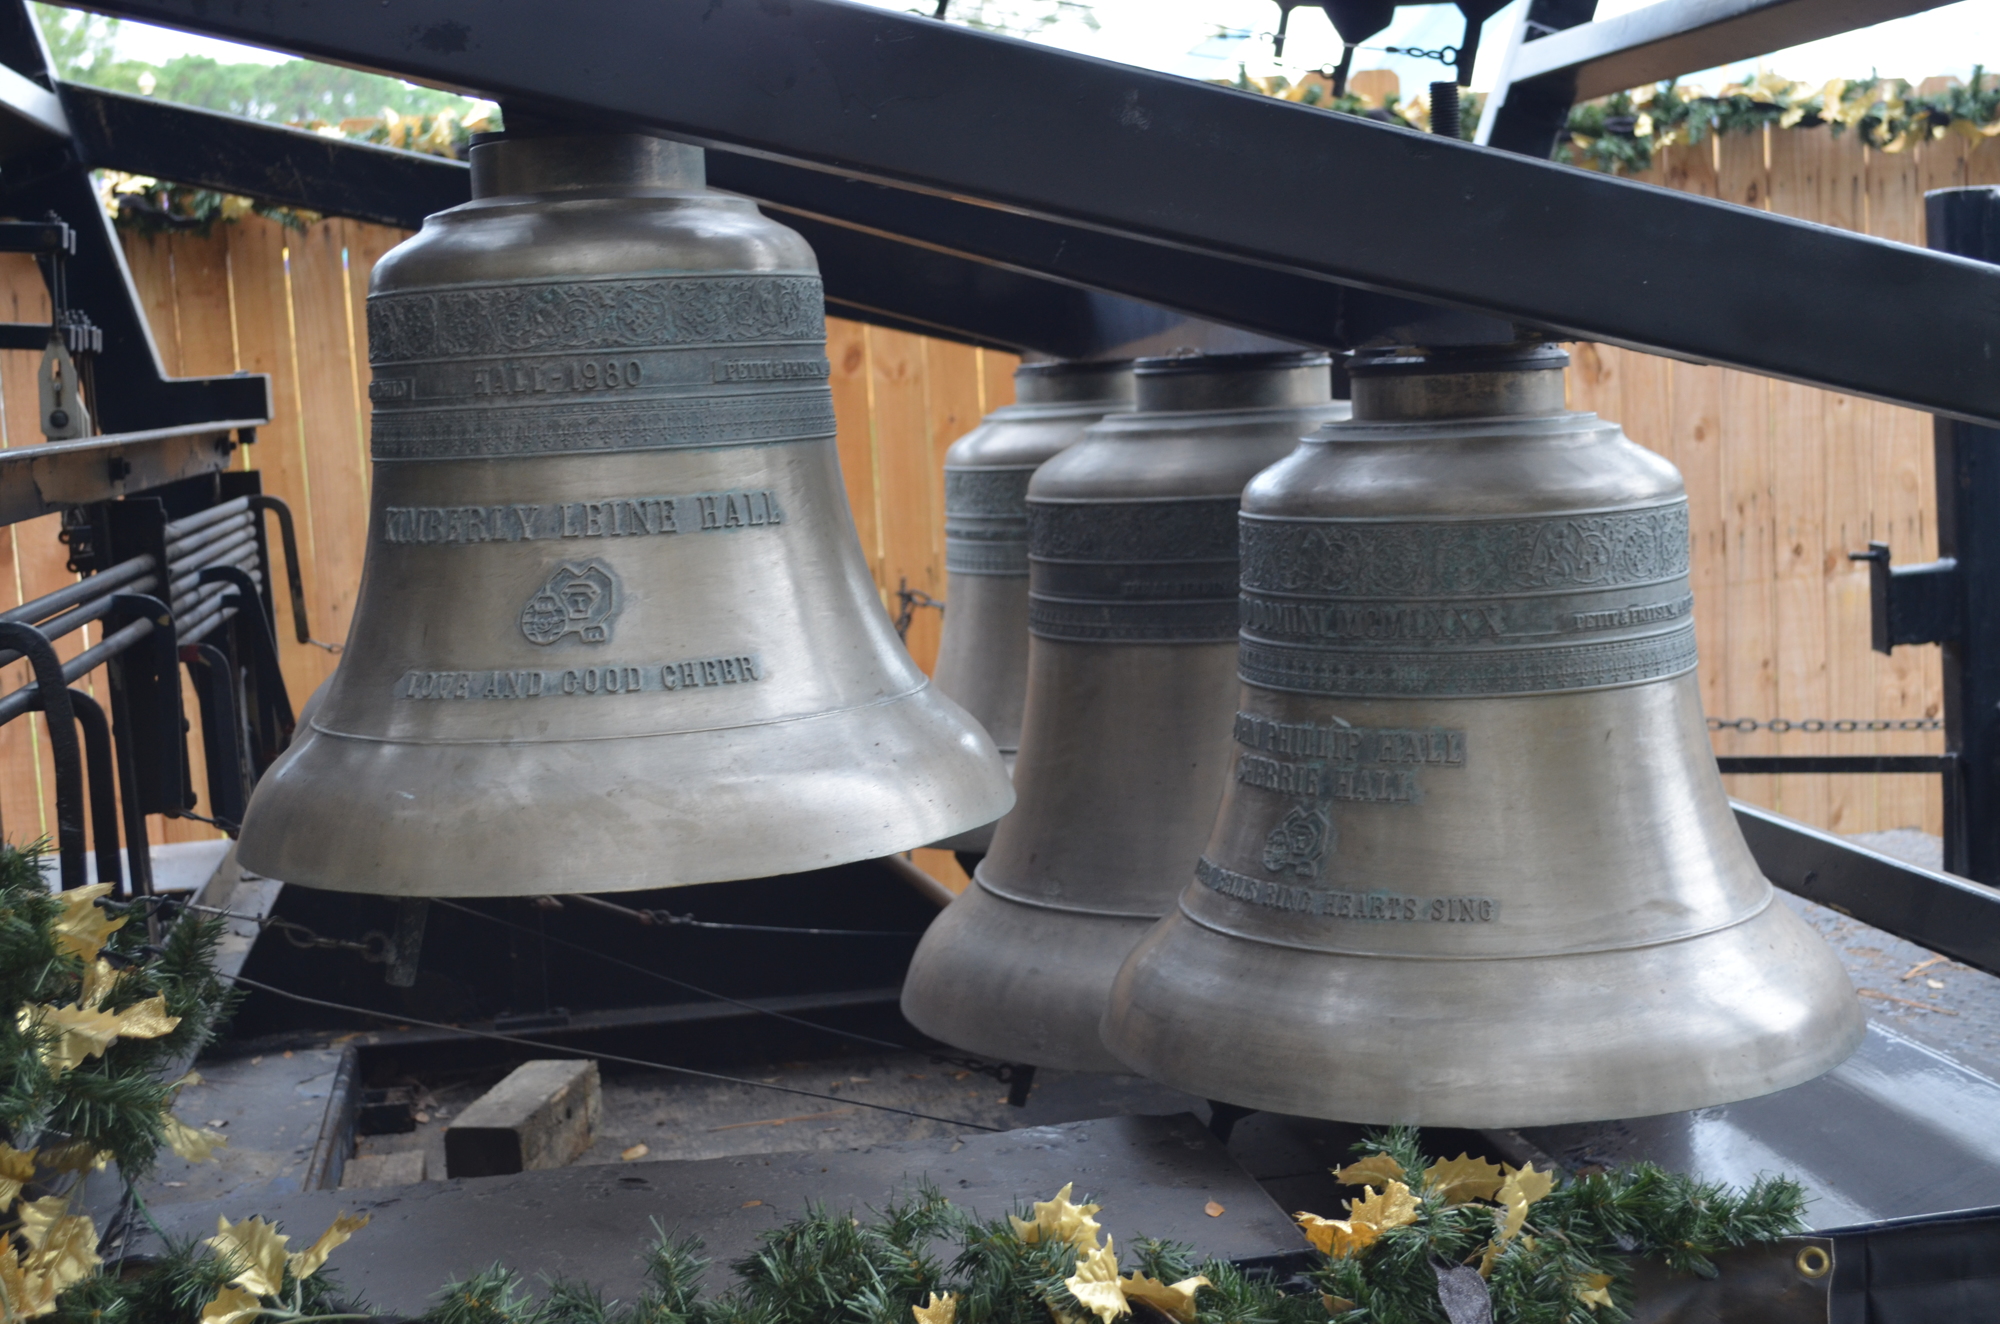 The bells on the Cast in Bronze mobile carillon range in size, with the overall instrument weighing in at 4 tons.